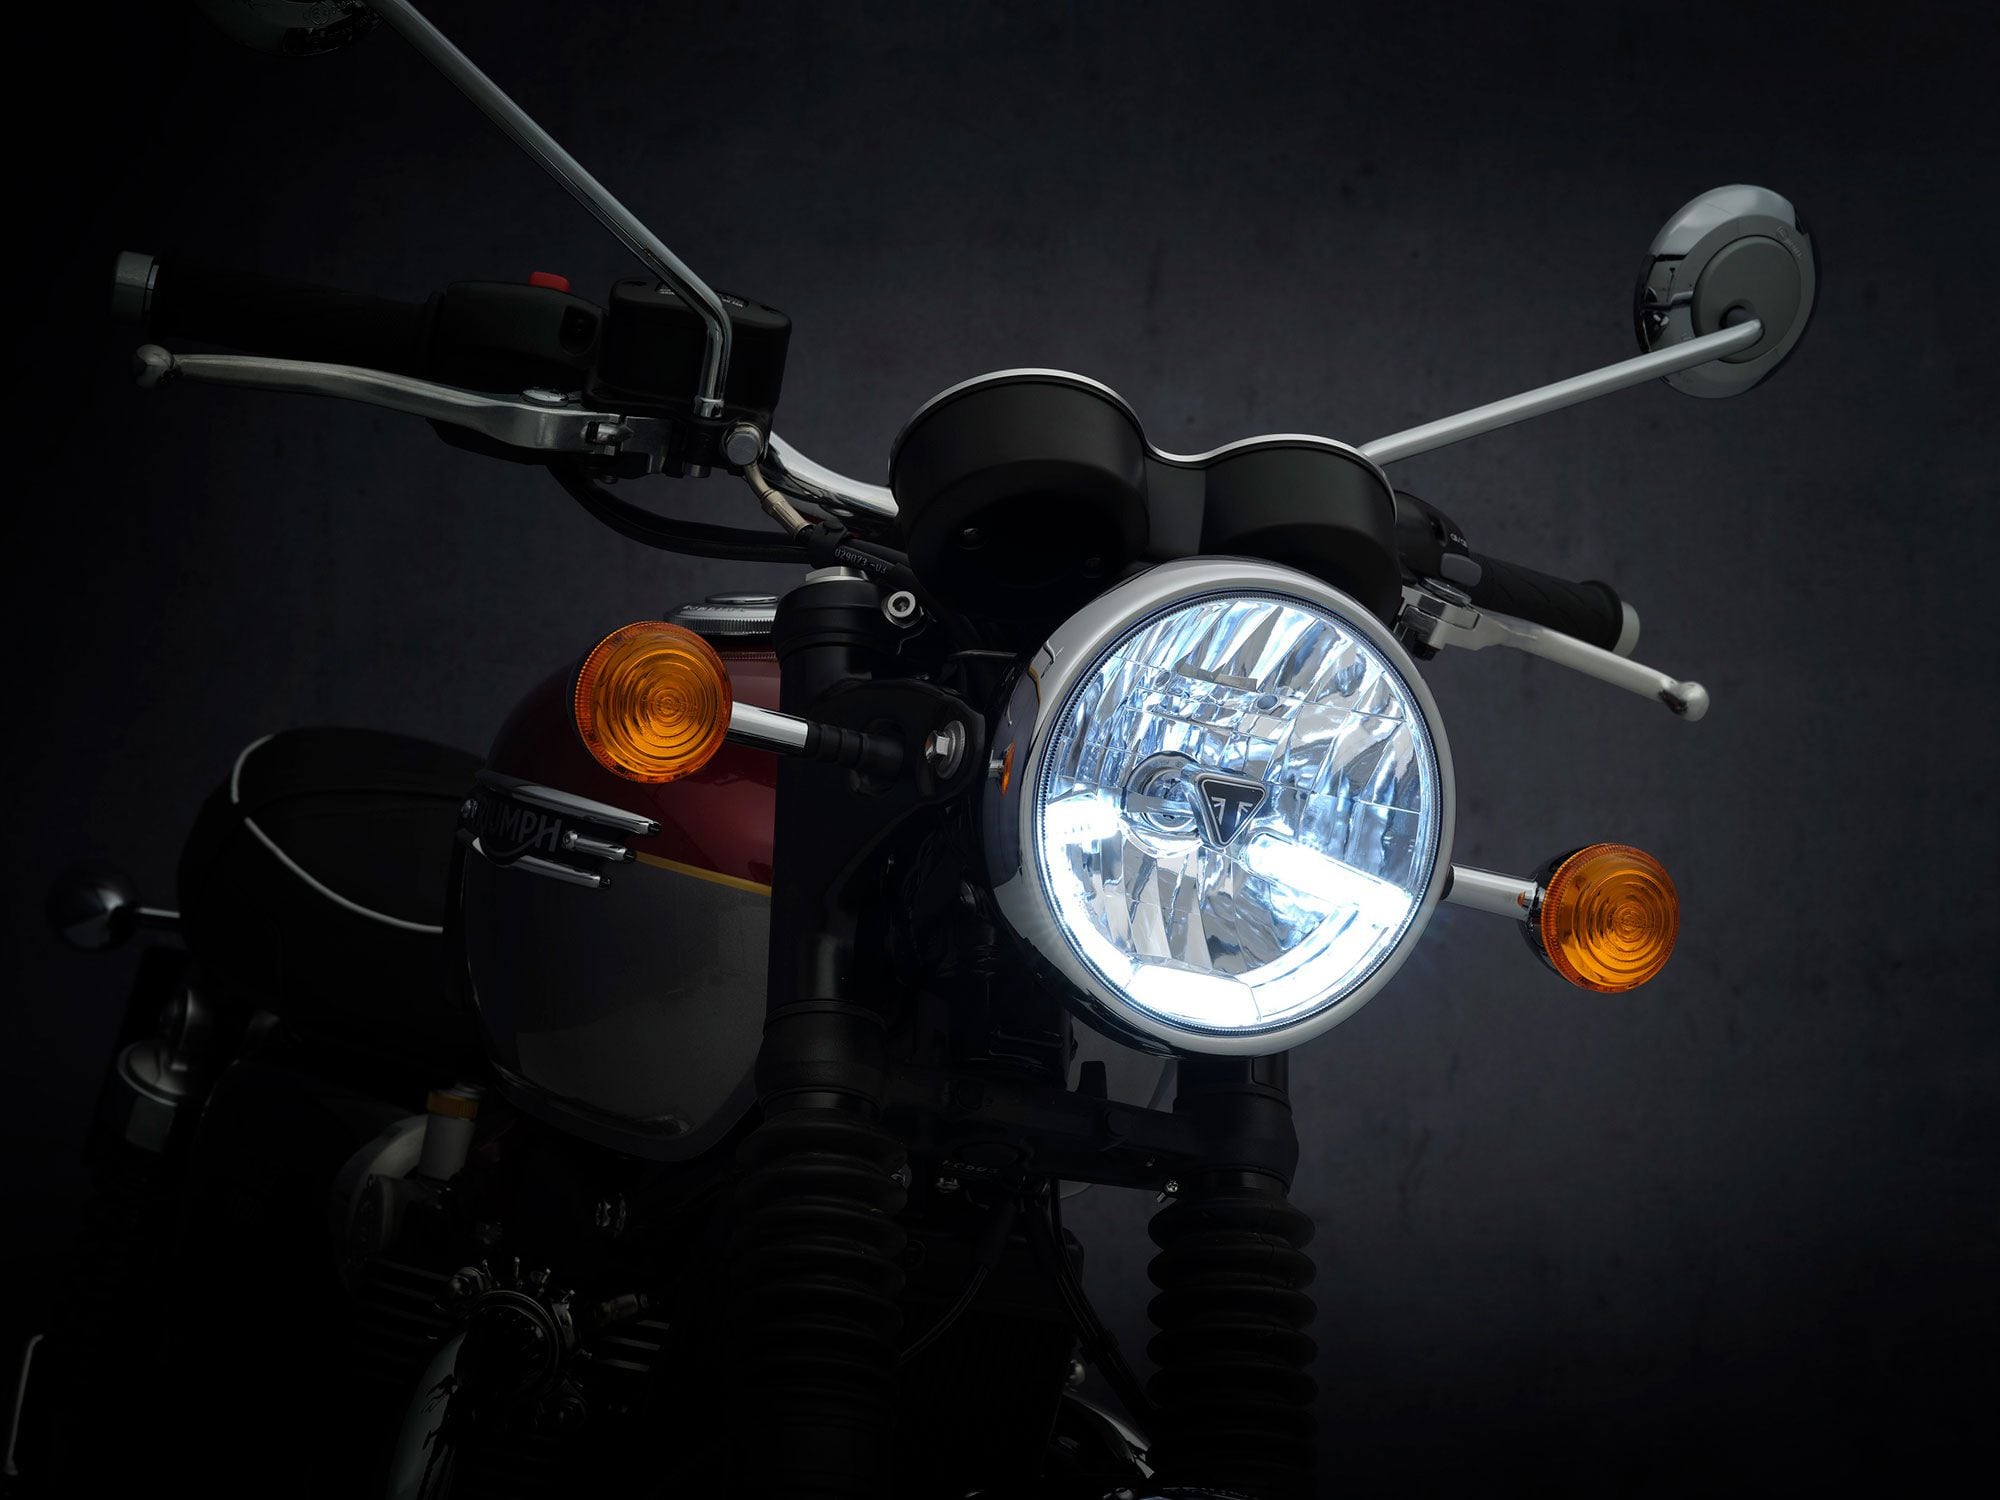 Full LED headlights, some with DRL, are featured on most of the new 2021 Bonneville range.